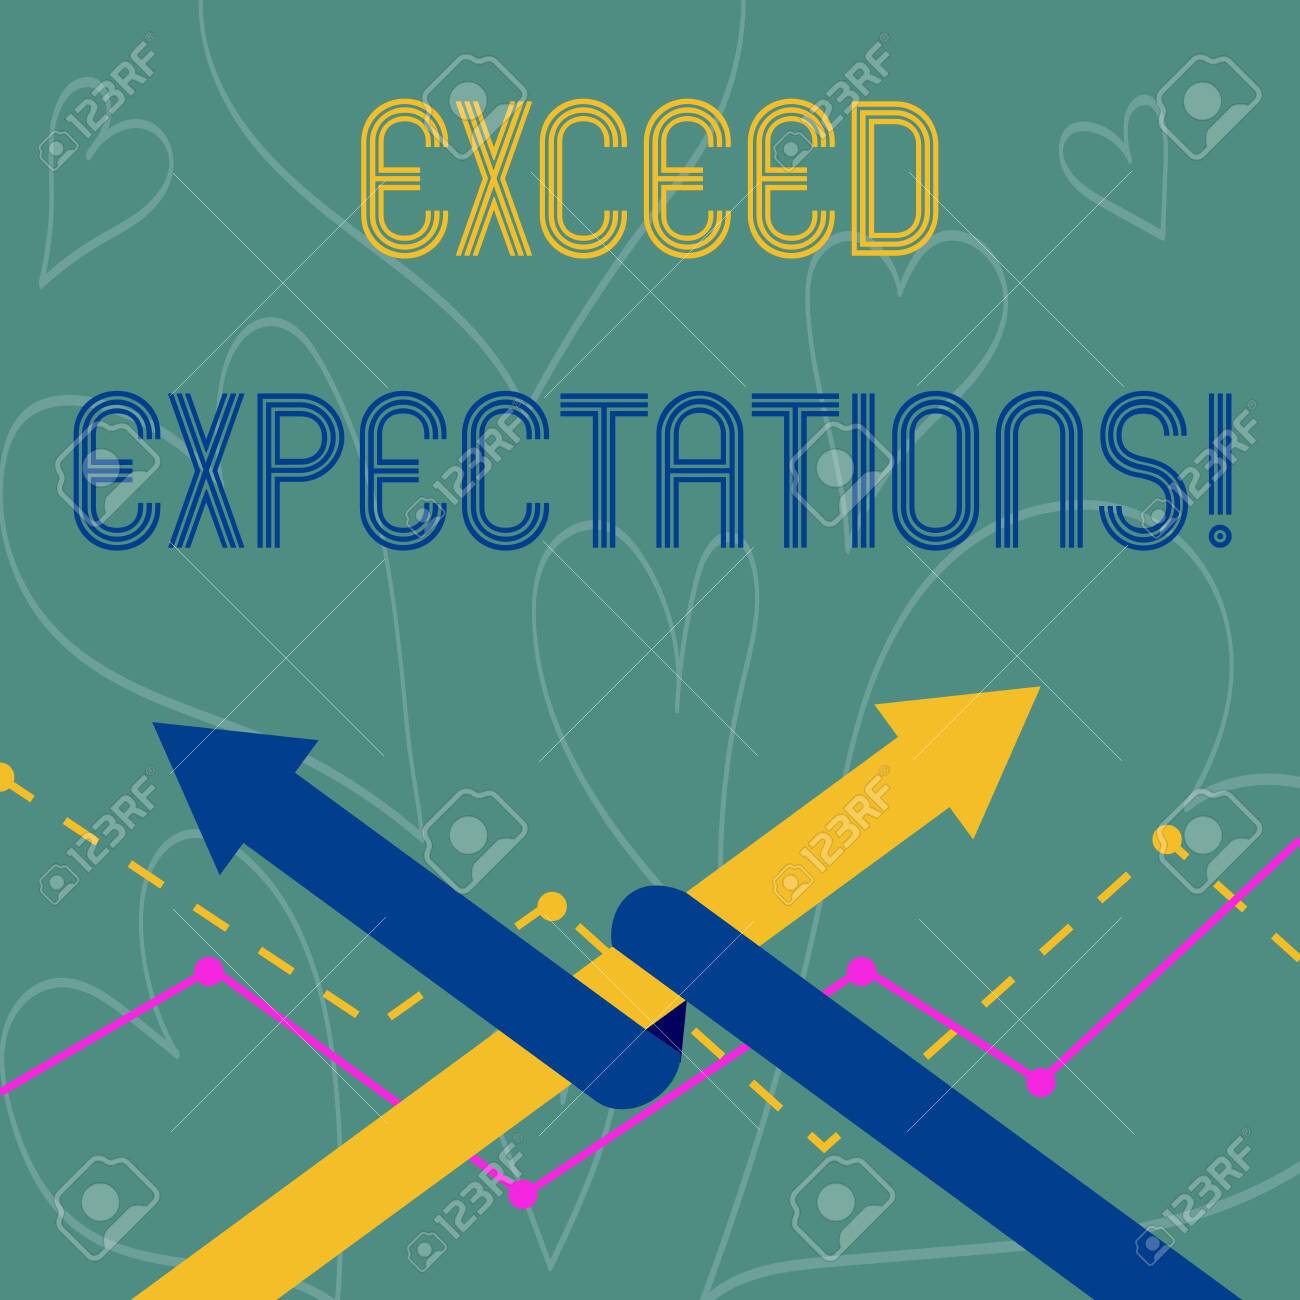 Exceed Expectations Meaning Serunen